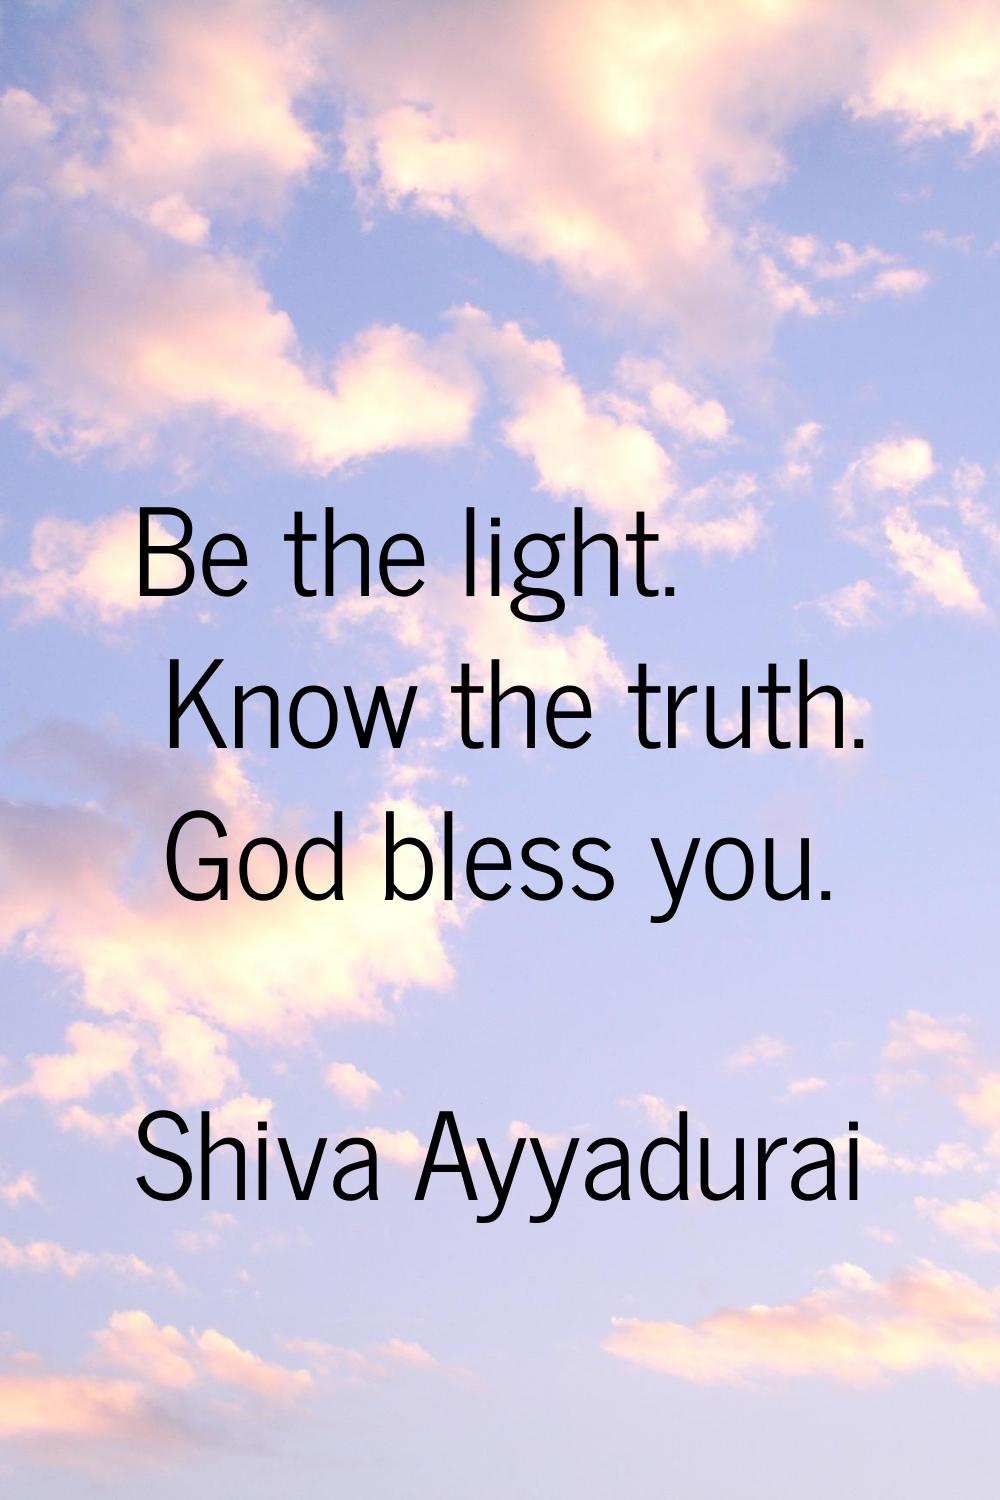 Be the light. Know the truth. God bless you.